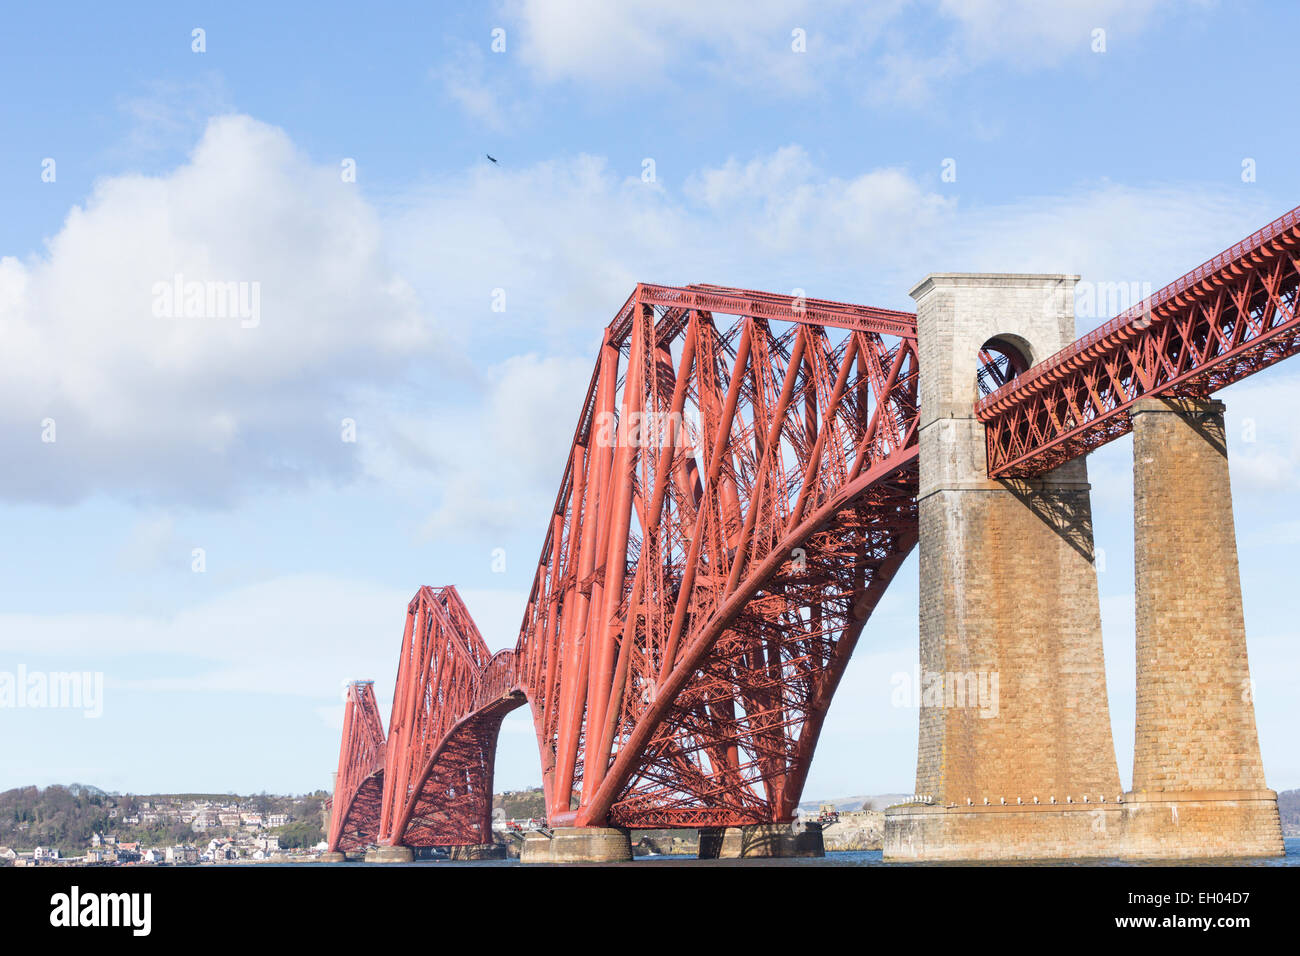 The Forth Railway Bridge on the celebration of the 125th Anniversary of the opening of the bridge Stock Photo